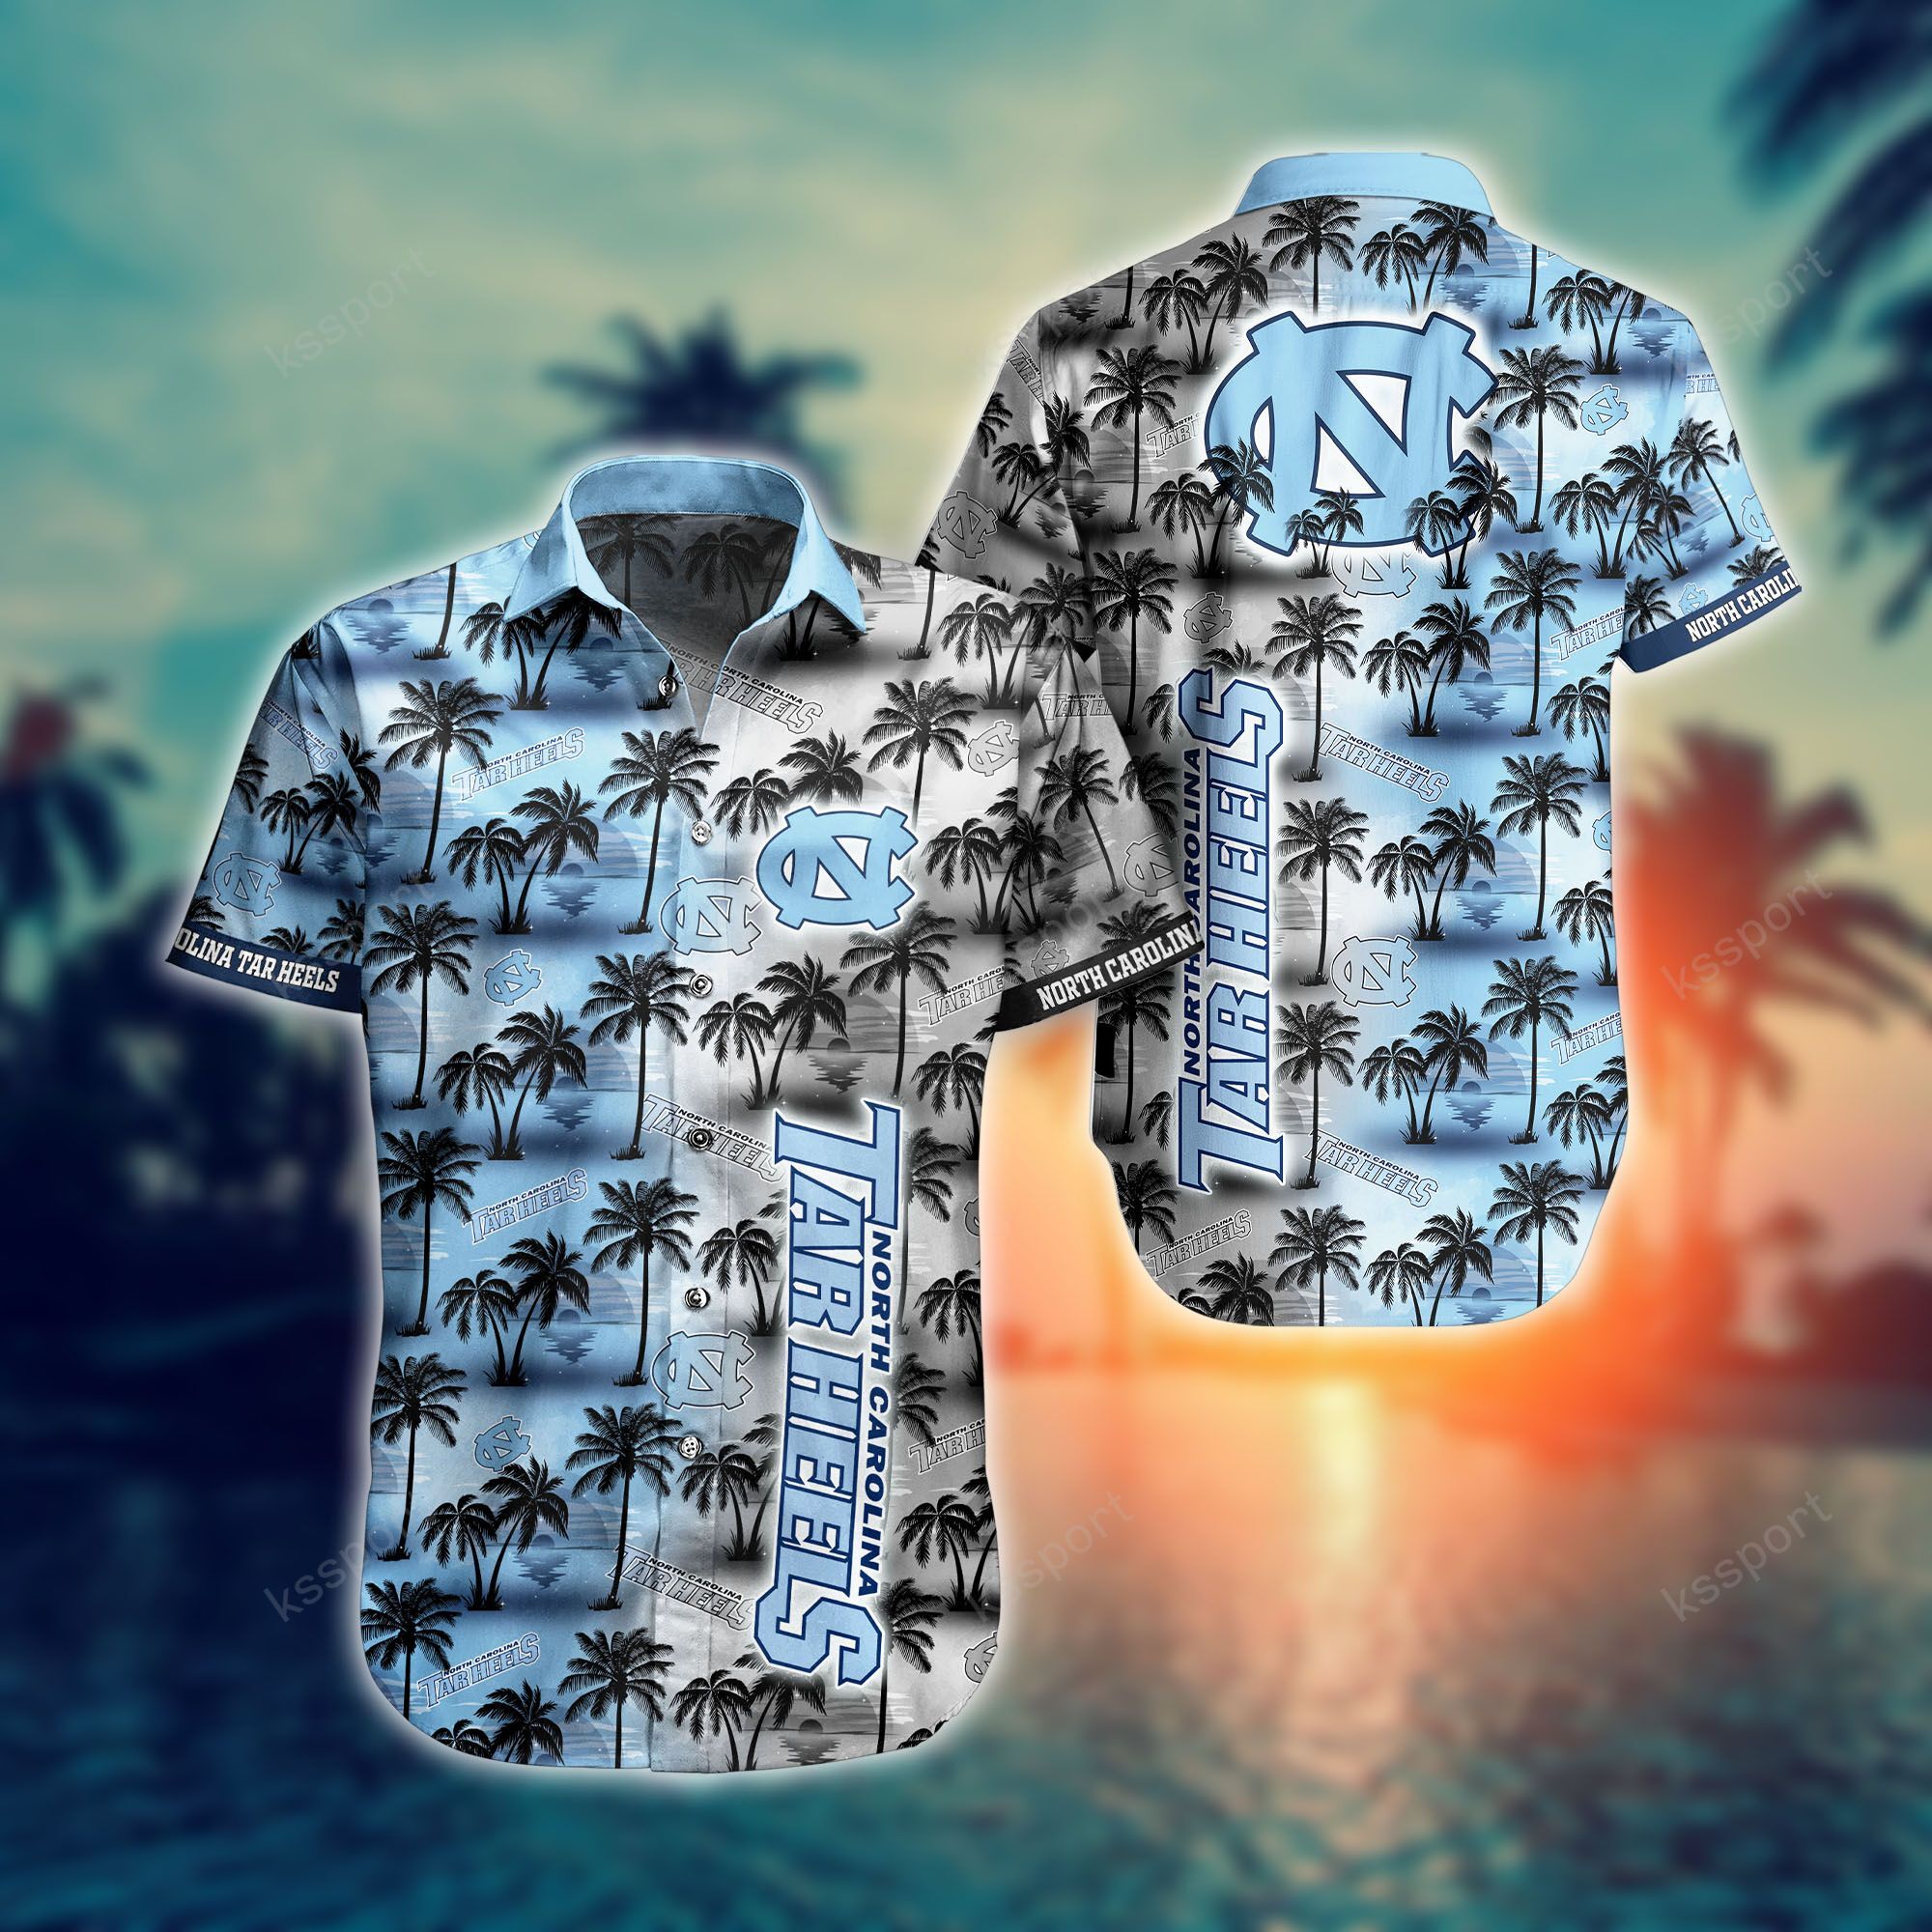 Treat yourself to a cool Hawaiian set today! 44